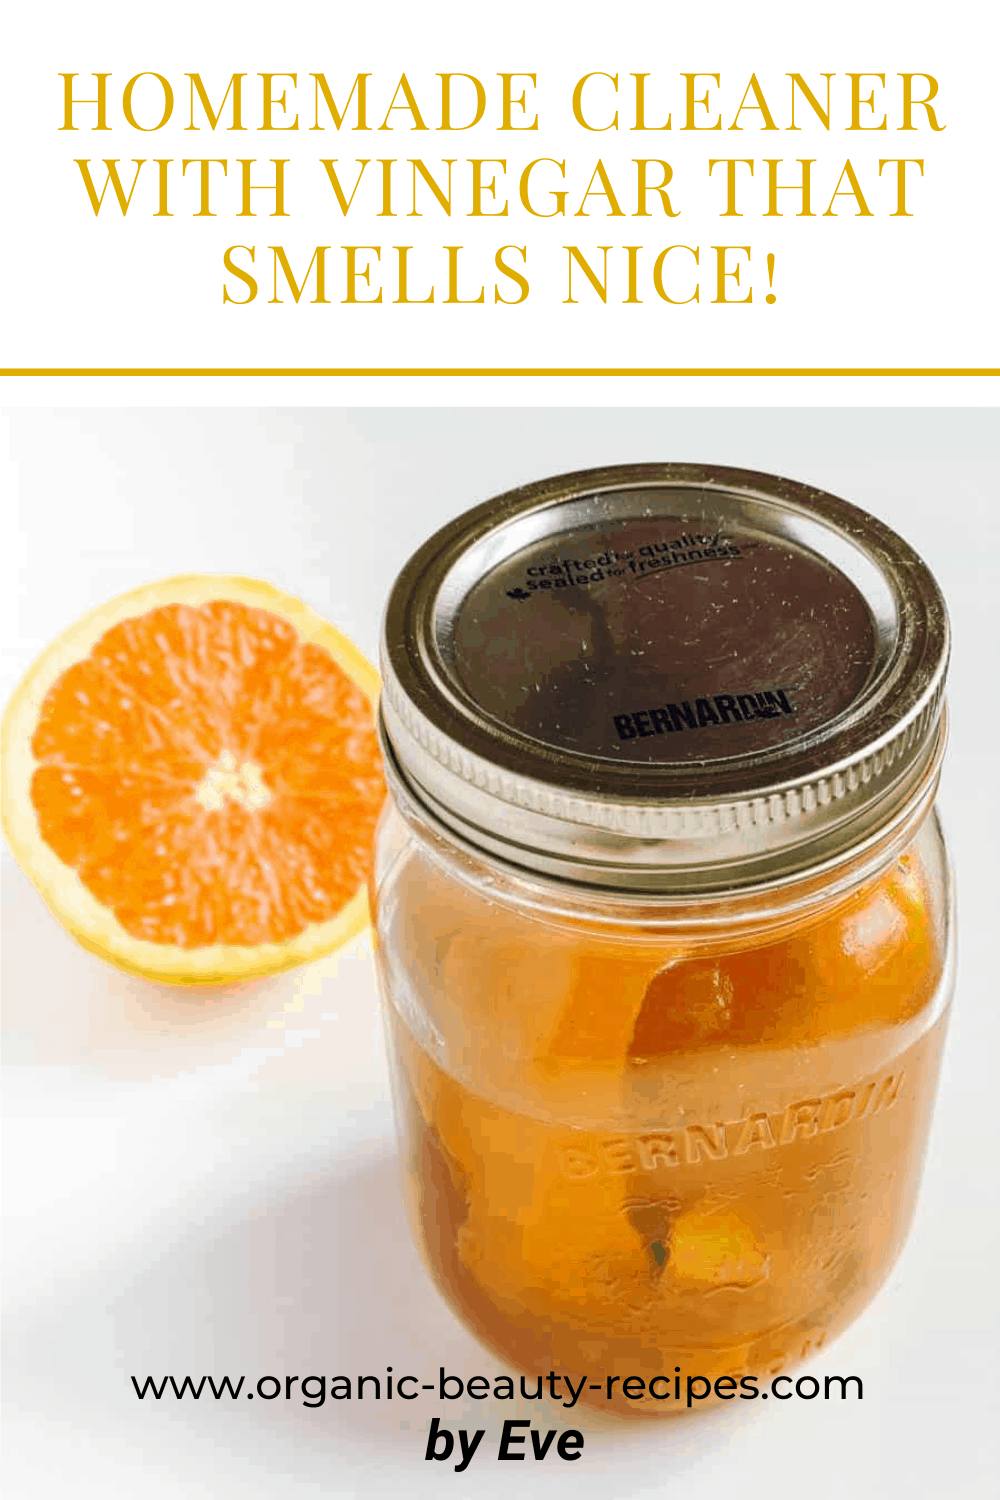 Homemade Cleaner With Vinegar That Smells Nice!